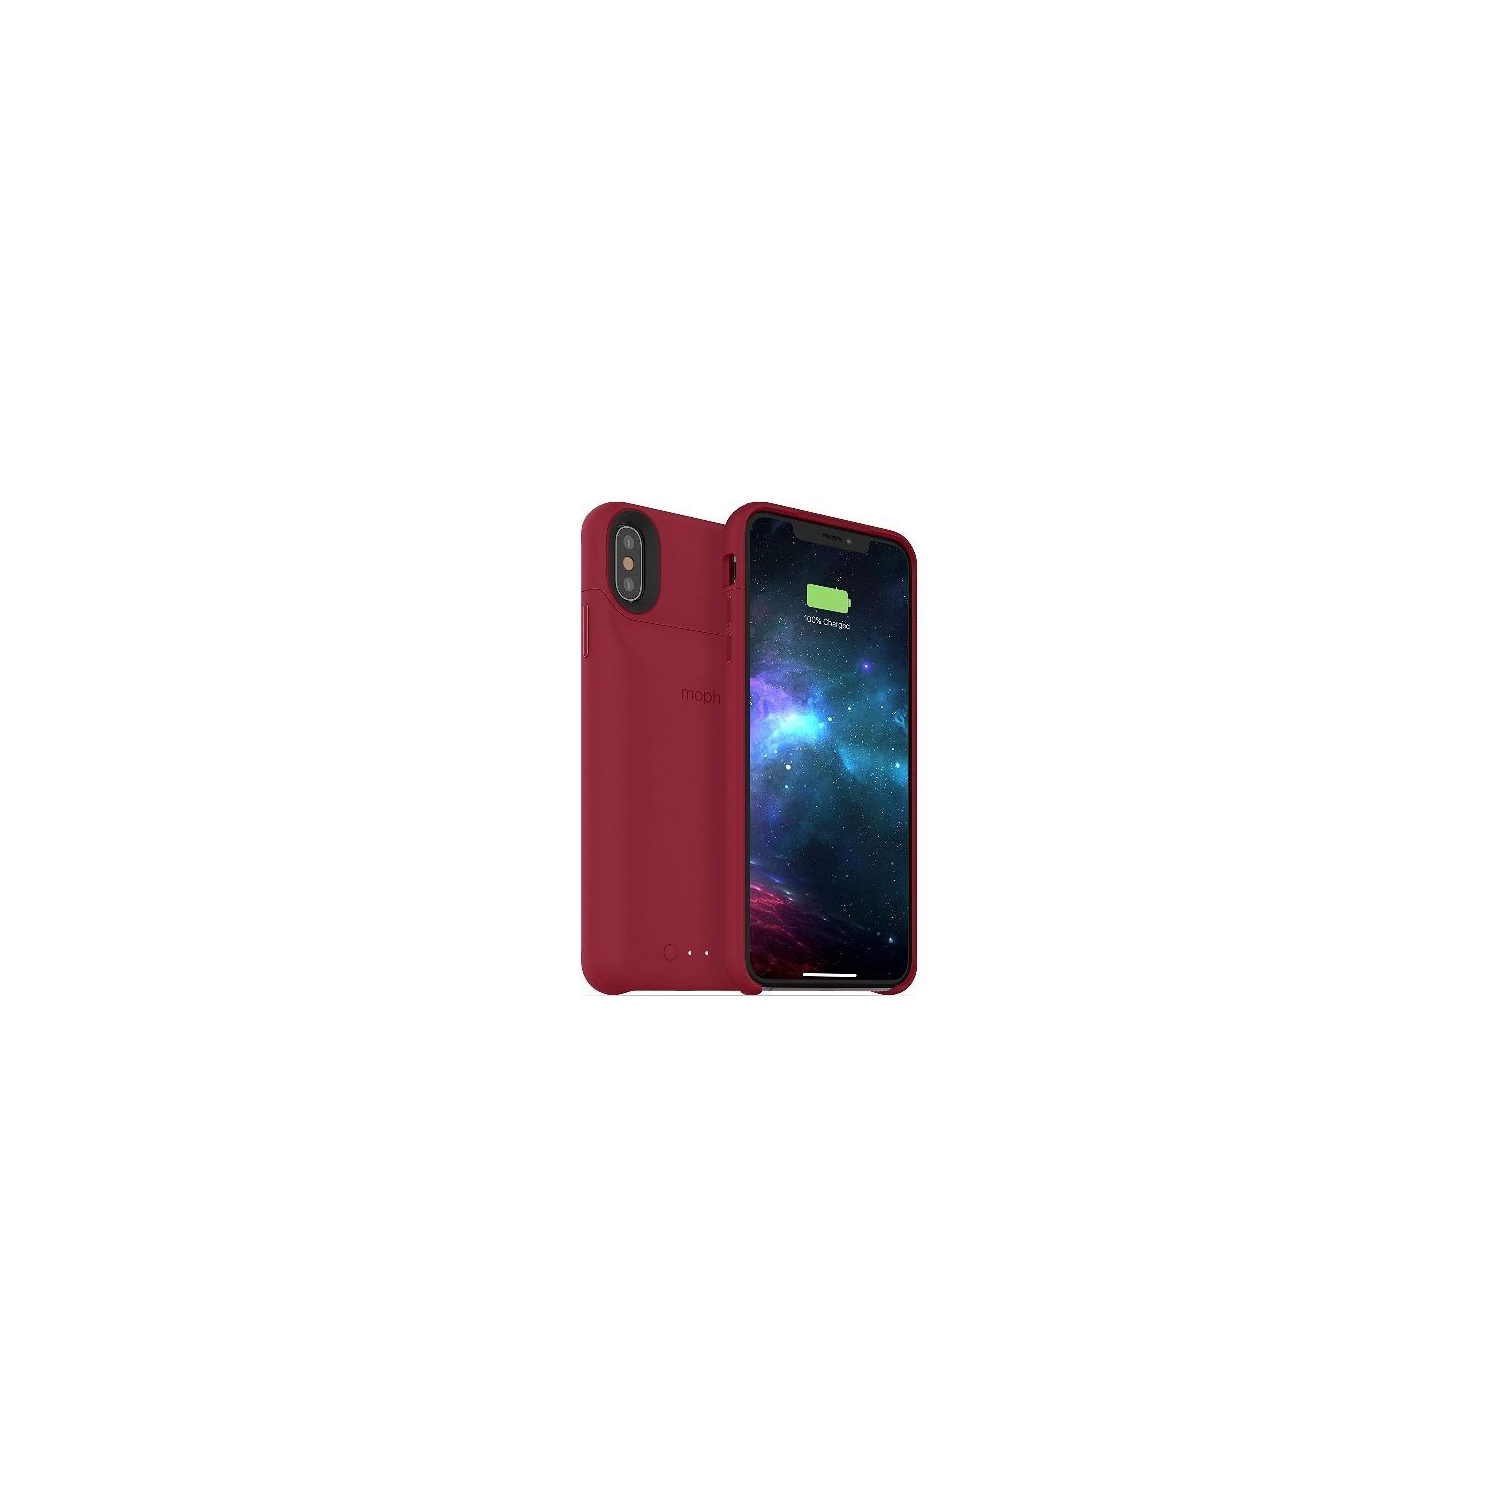 Juice Pack Access Battery Case Made for Apple iPhone Xs Max (2, 200mAh) - Dark Red